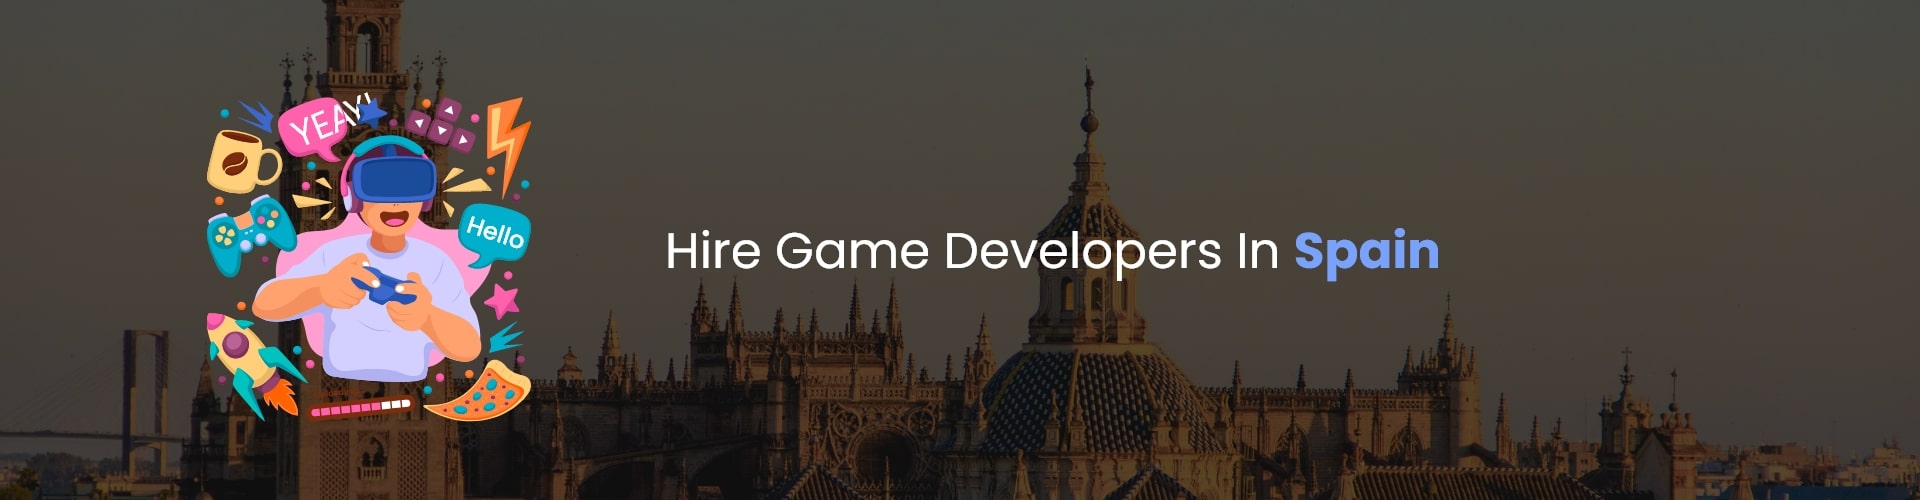 hire game developers in spain